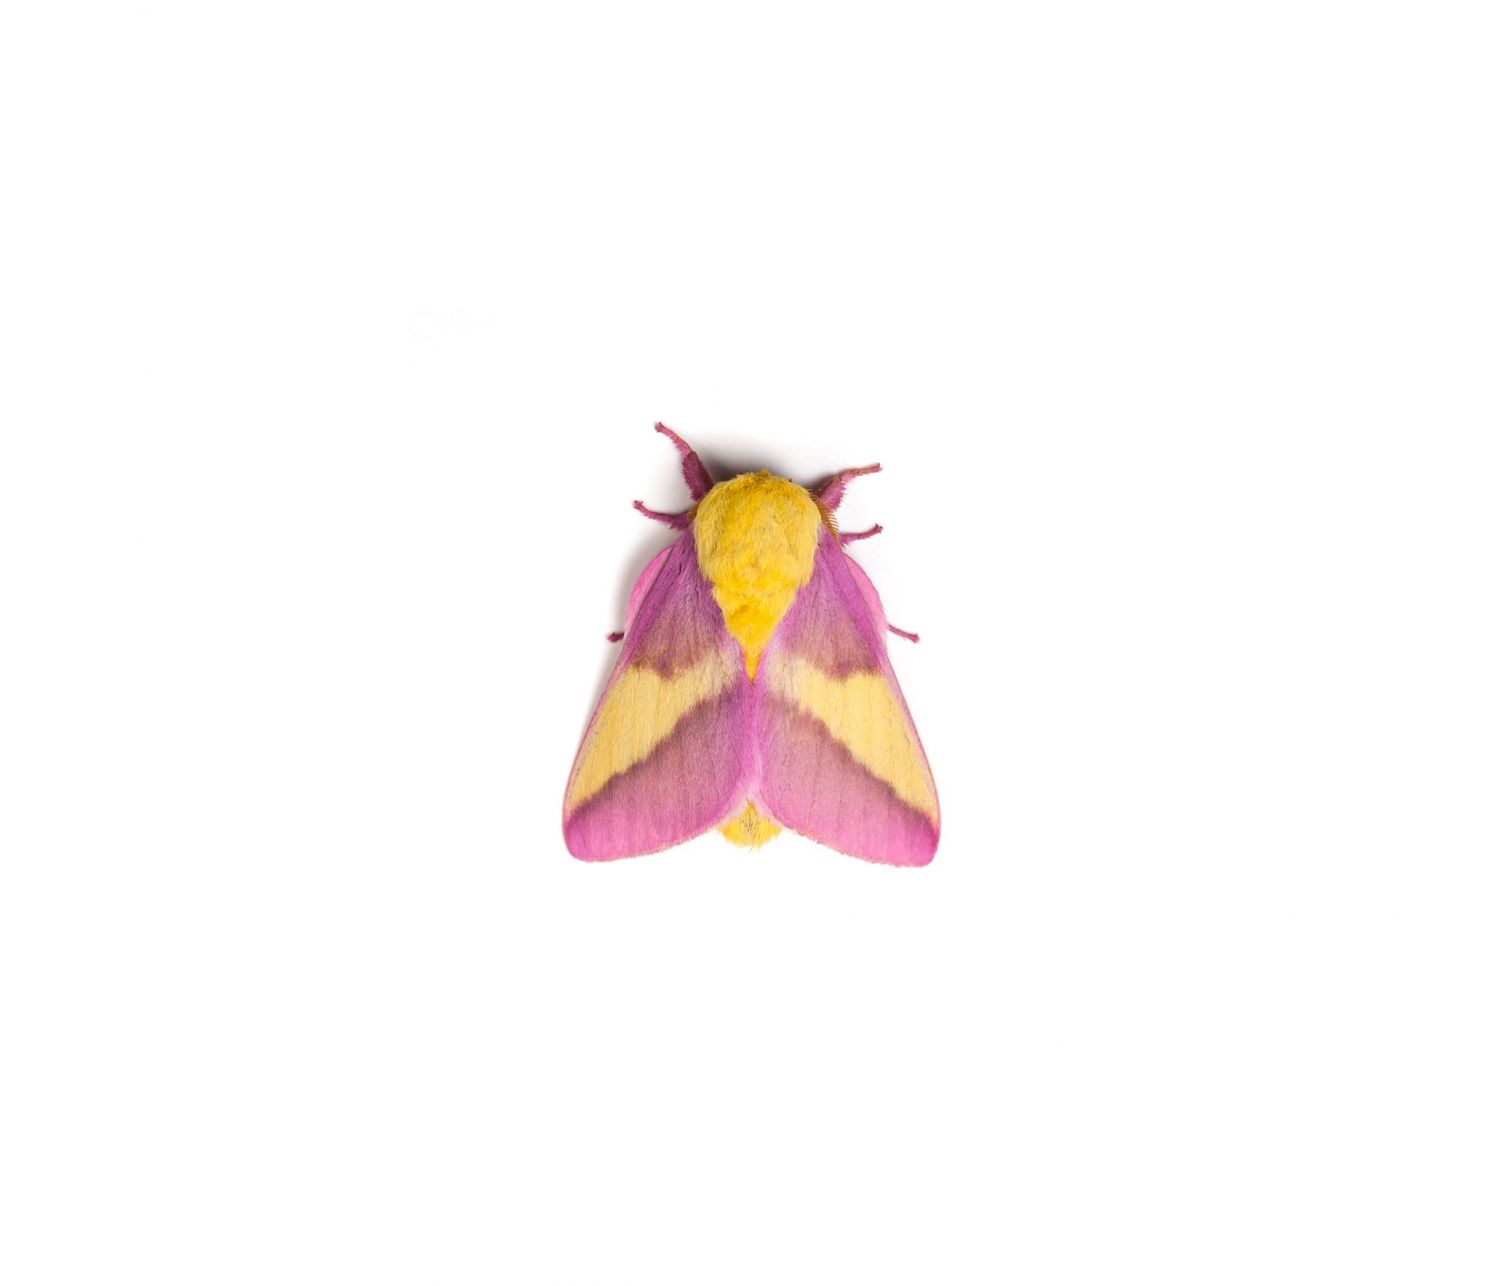 The Pink And Yellow Rosy Maple Moth Is An Eye Catching Garden Visitor